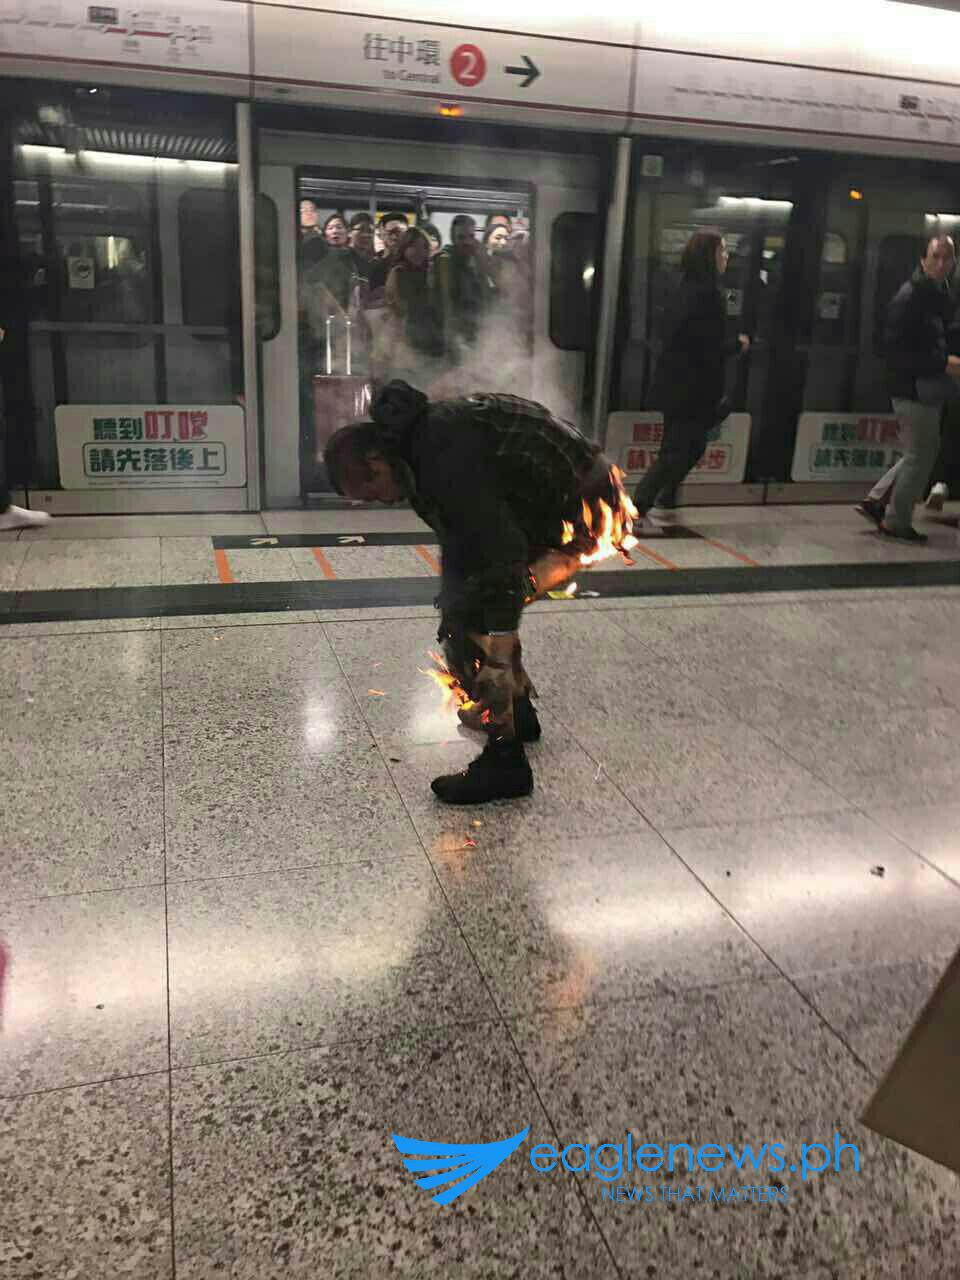 RUSH hour subway fire.  (Warning graphic image). This Hong Kong tourist was among three people in critical condition Saturday after a rush hour fire on a Hong Kong subway train on Friday, February 10, 2017.   Police say one of those critically injured had admitted to starting the fire himself, after dousing his trousers with thinner liquid.  His mental condition is still being checked.  (Photo courtesy Eagle News Service Hong Kong bureau)) 